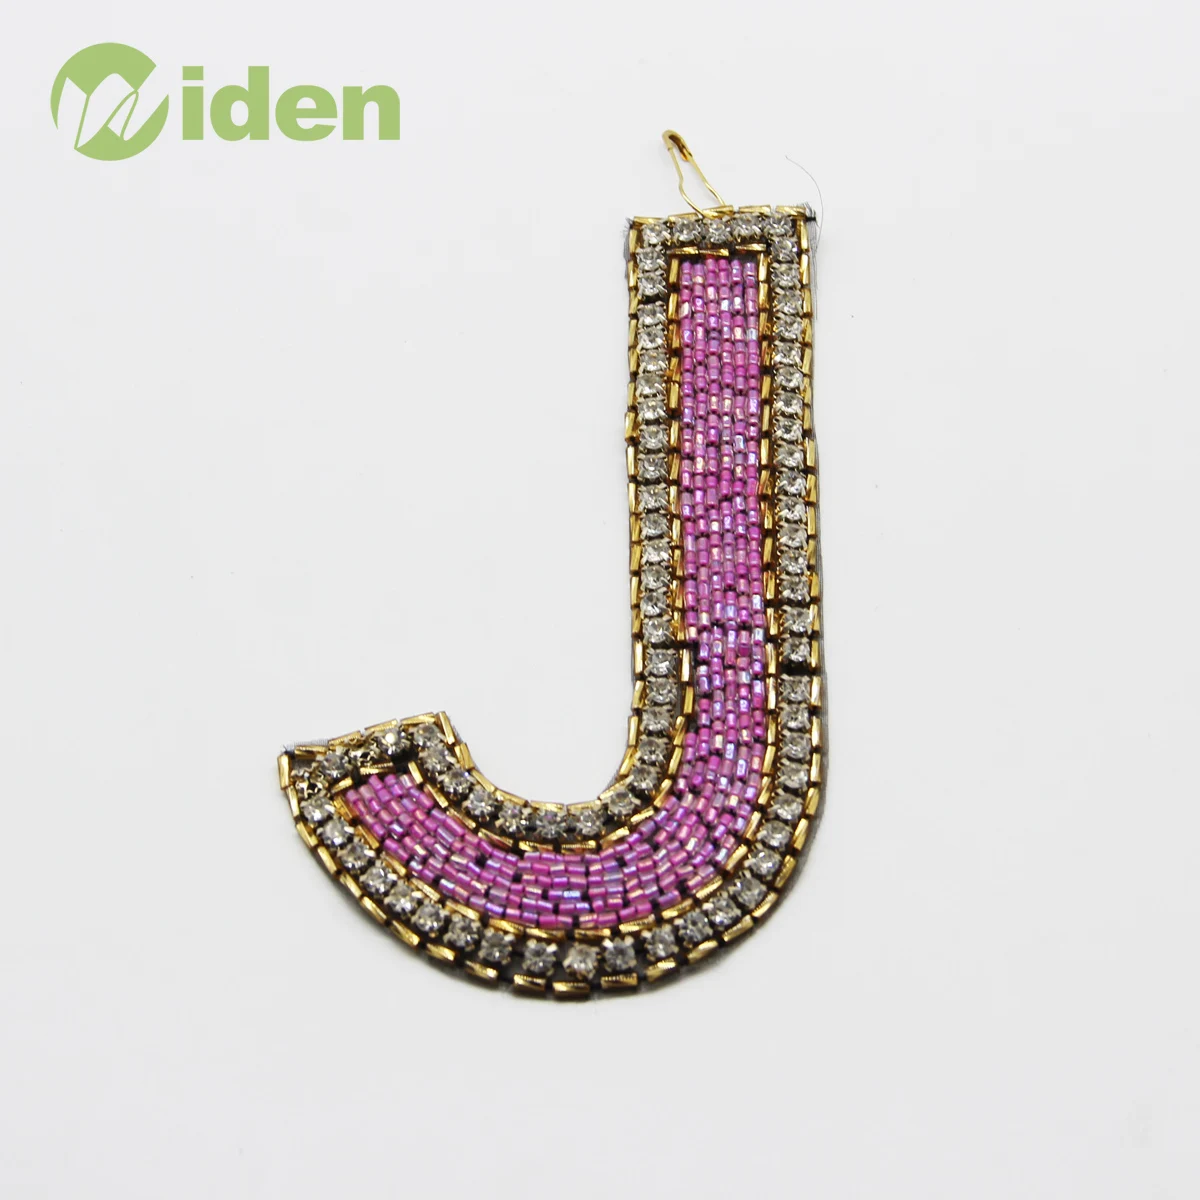 High Quality Letter Applique Sew On Patches